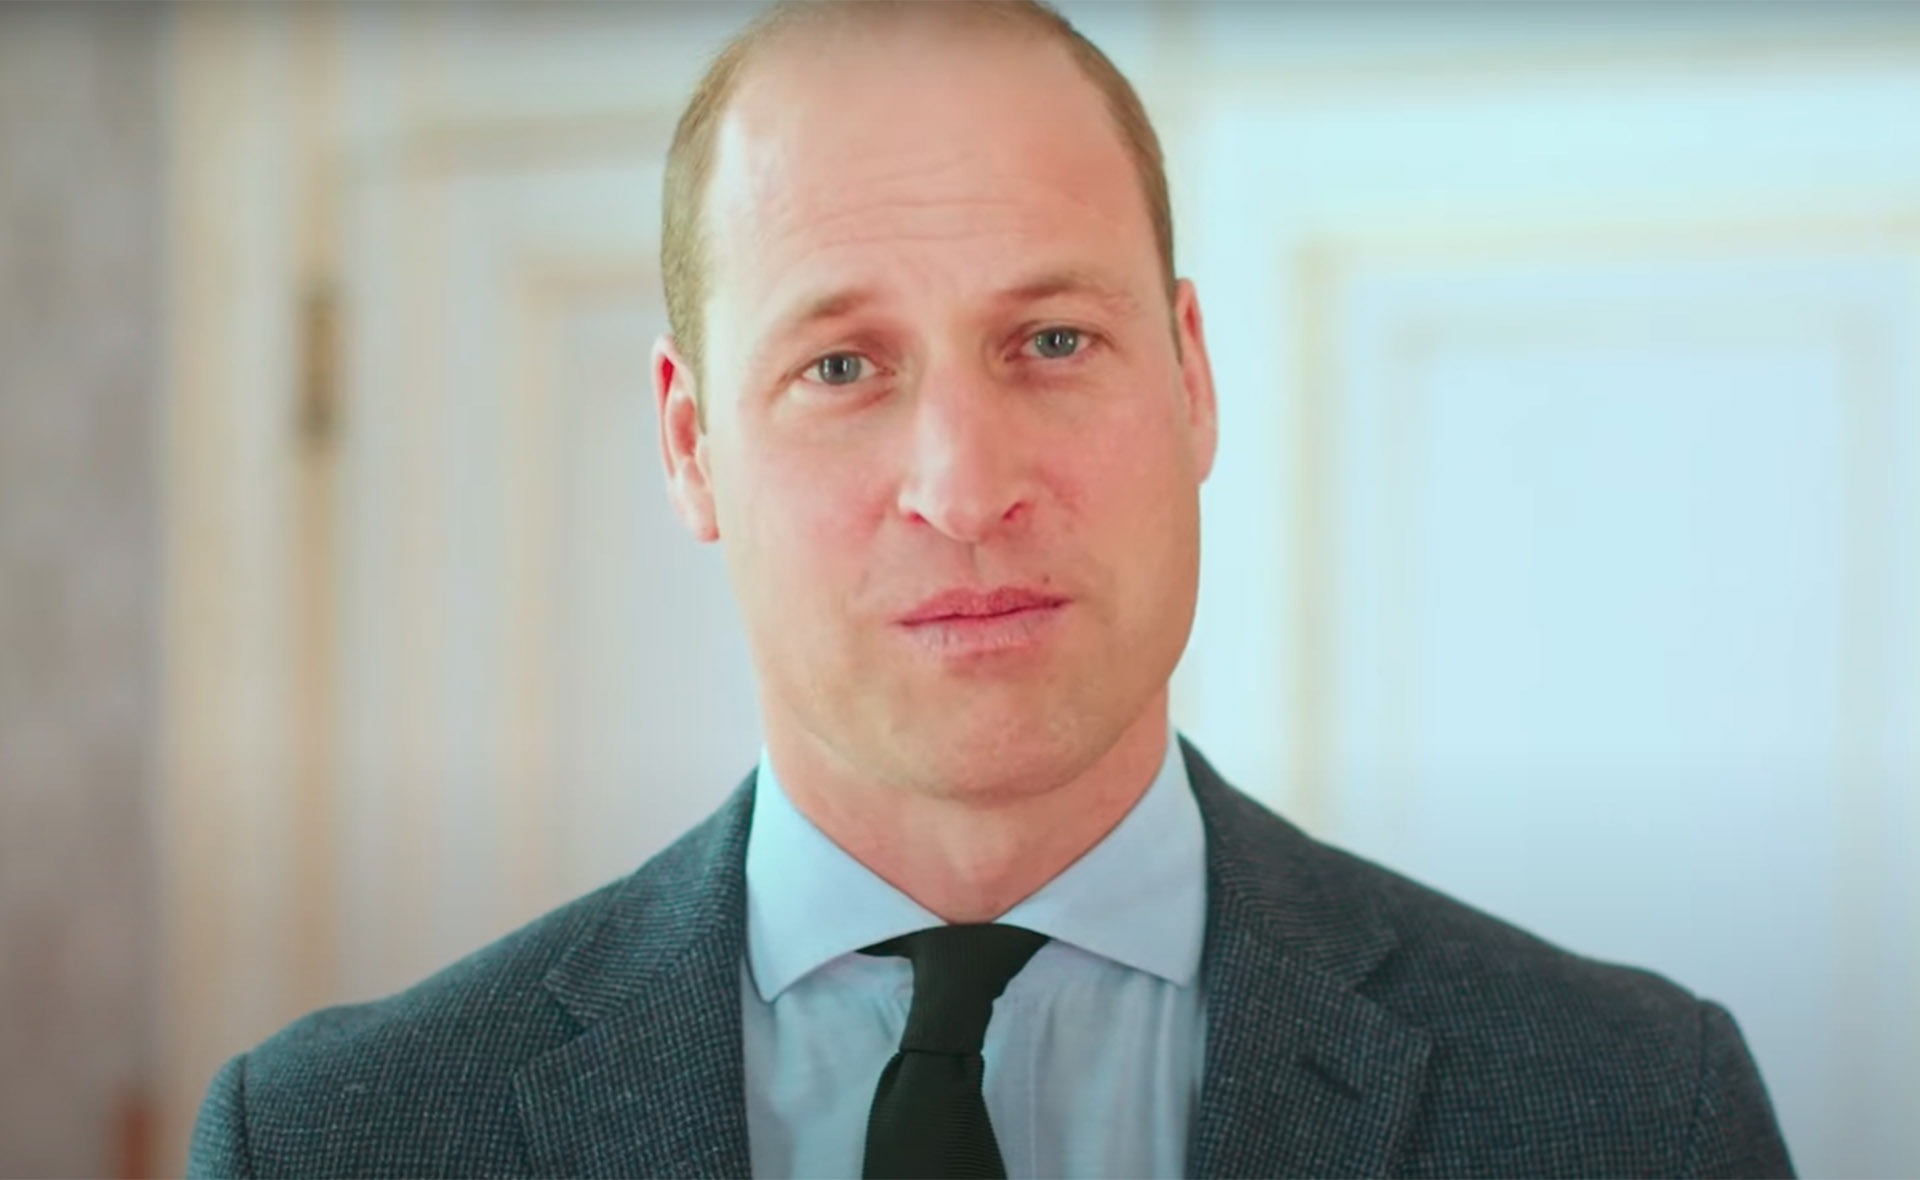 Prince William’s first statement since the Queen’s funeral hints at special reunion with Prince Harry